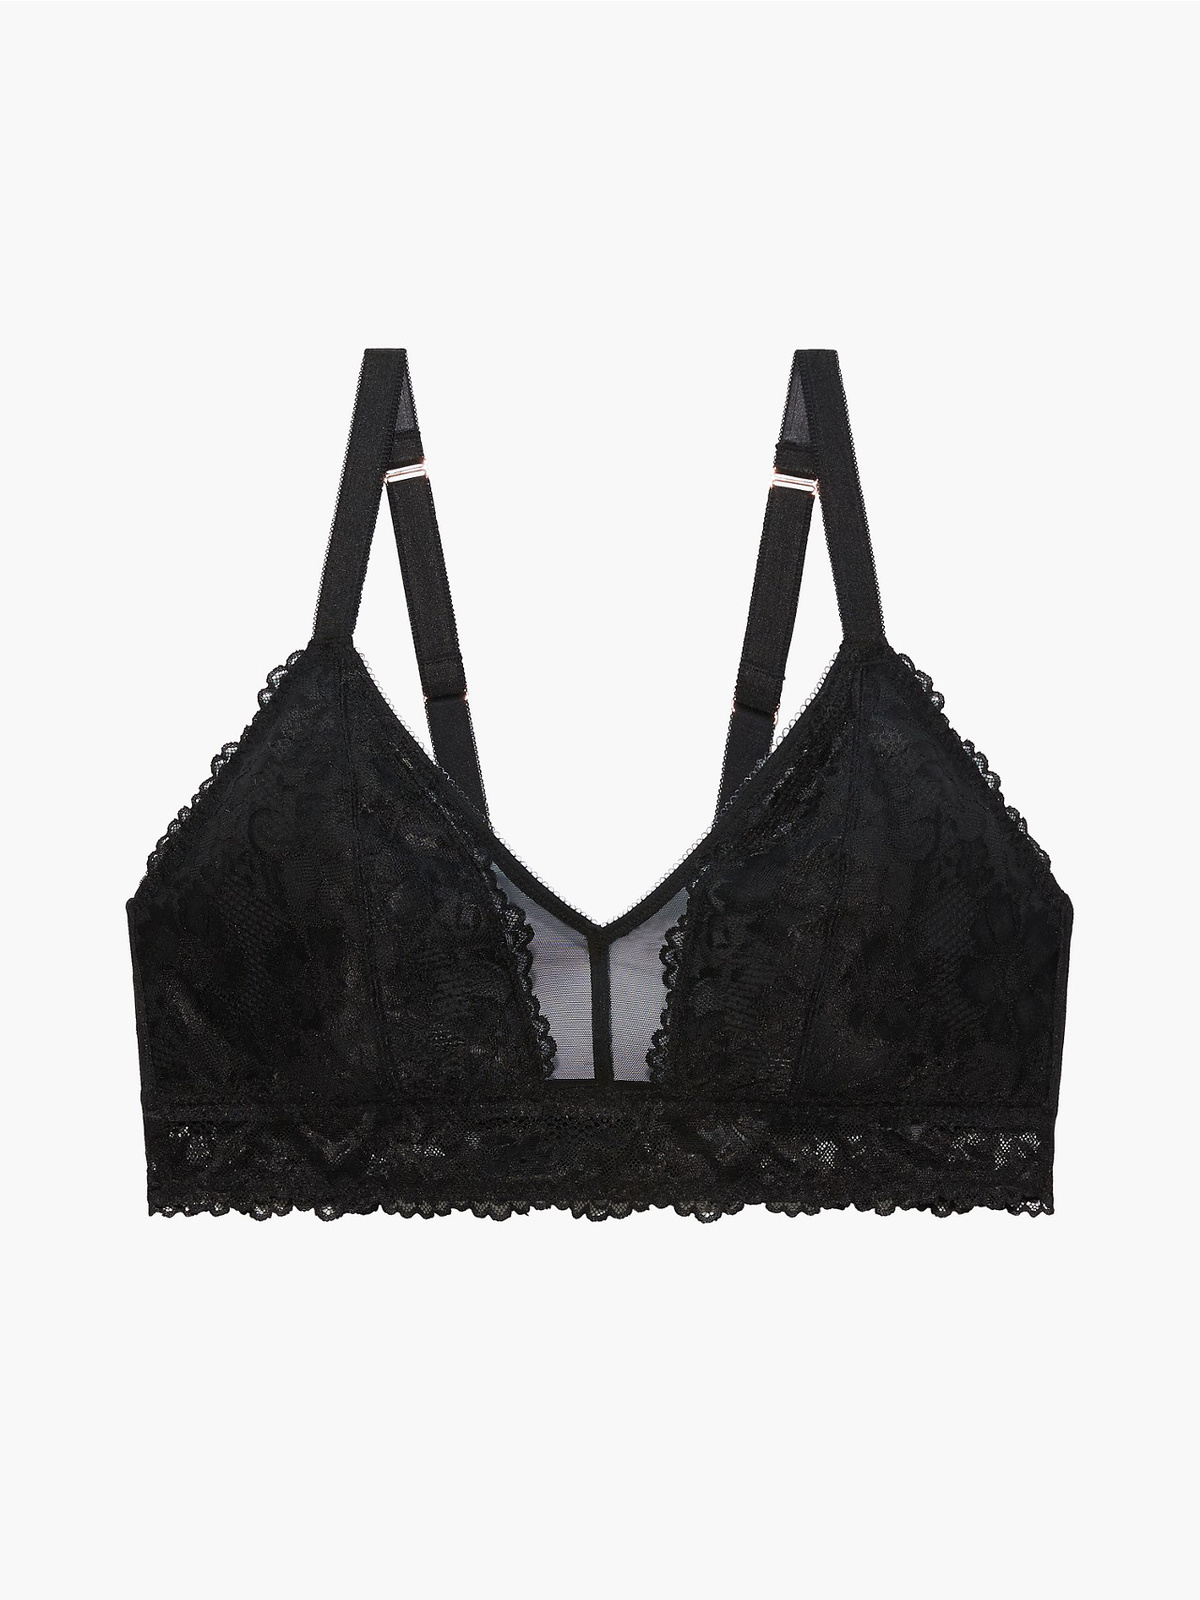 Floral Lace and Mesh Bralette in Black | SAVAGE X FENTY